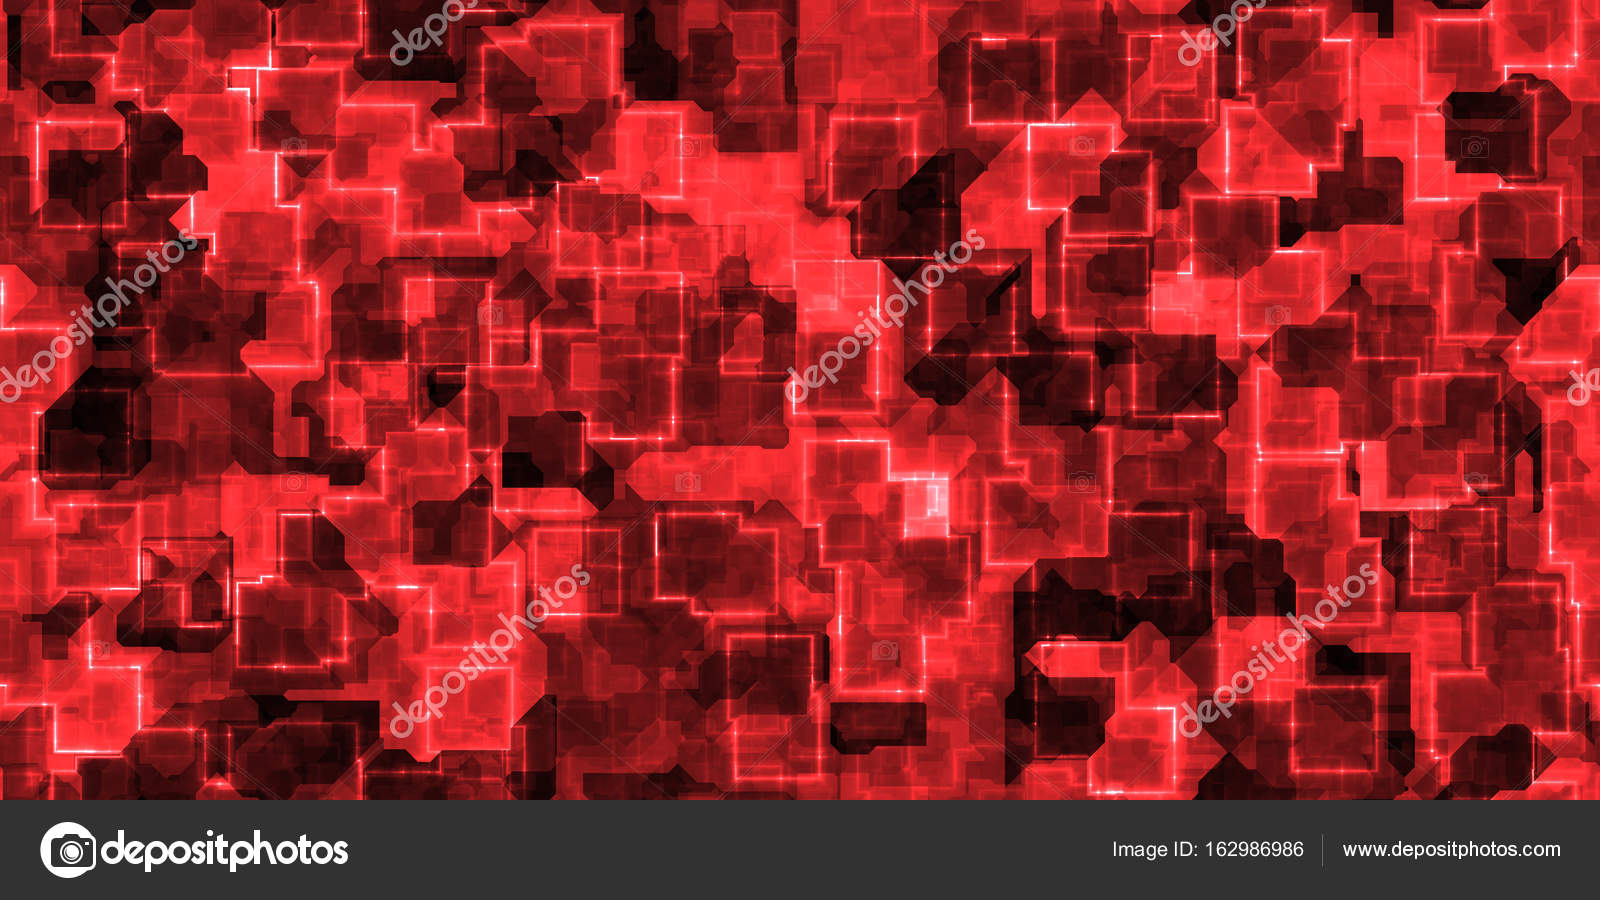 Red Seamless Cyber Glow Neon Squares Pattern Background Texture Stock Photo C Sanches812